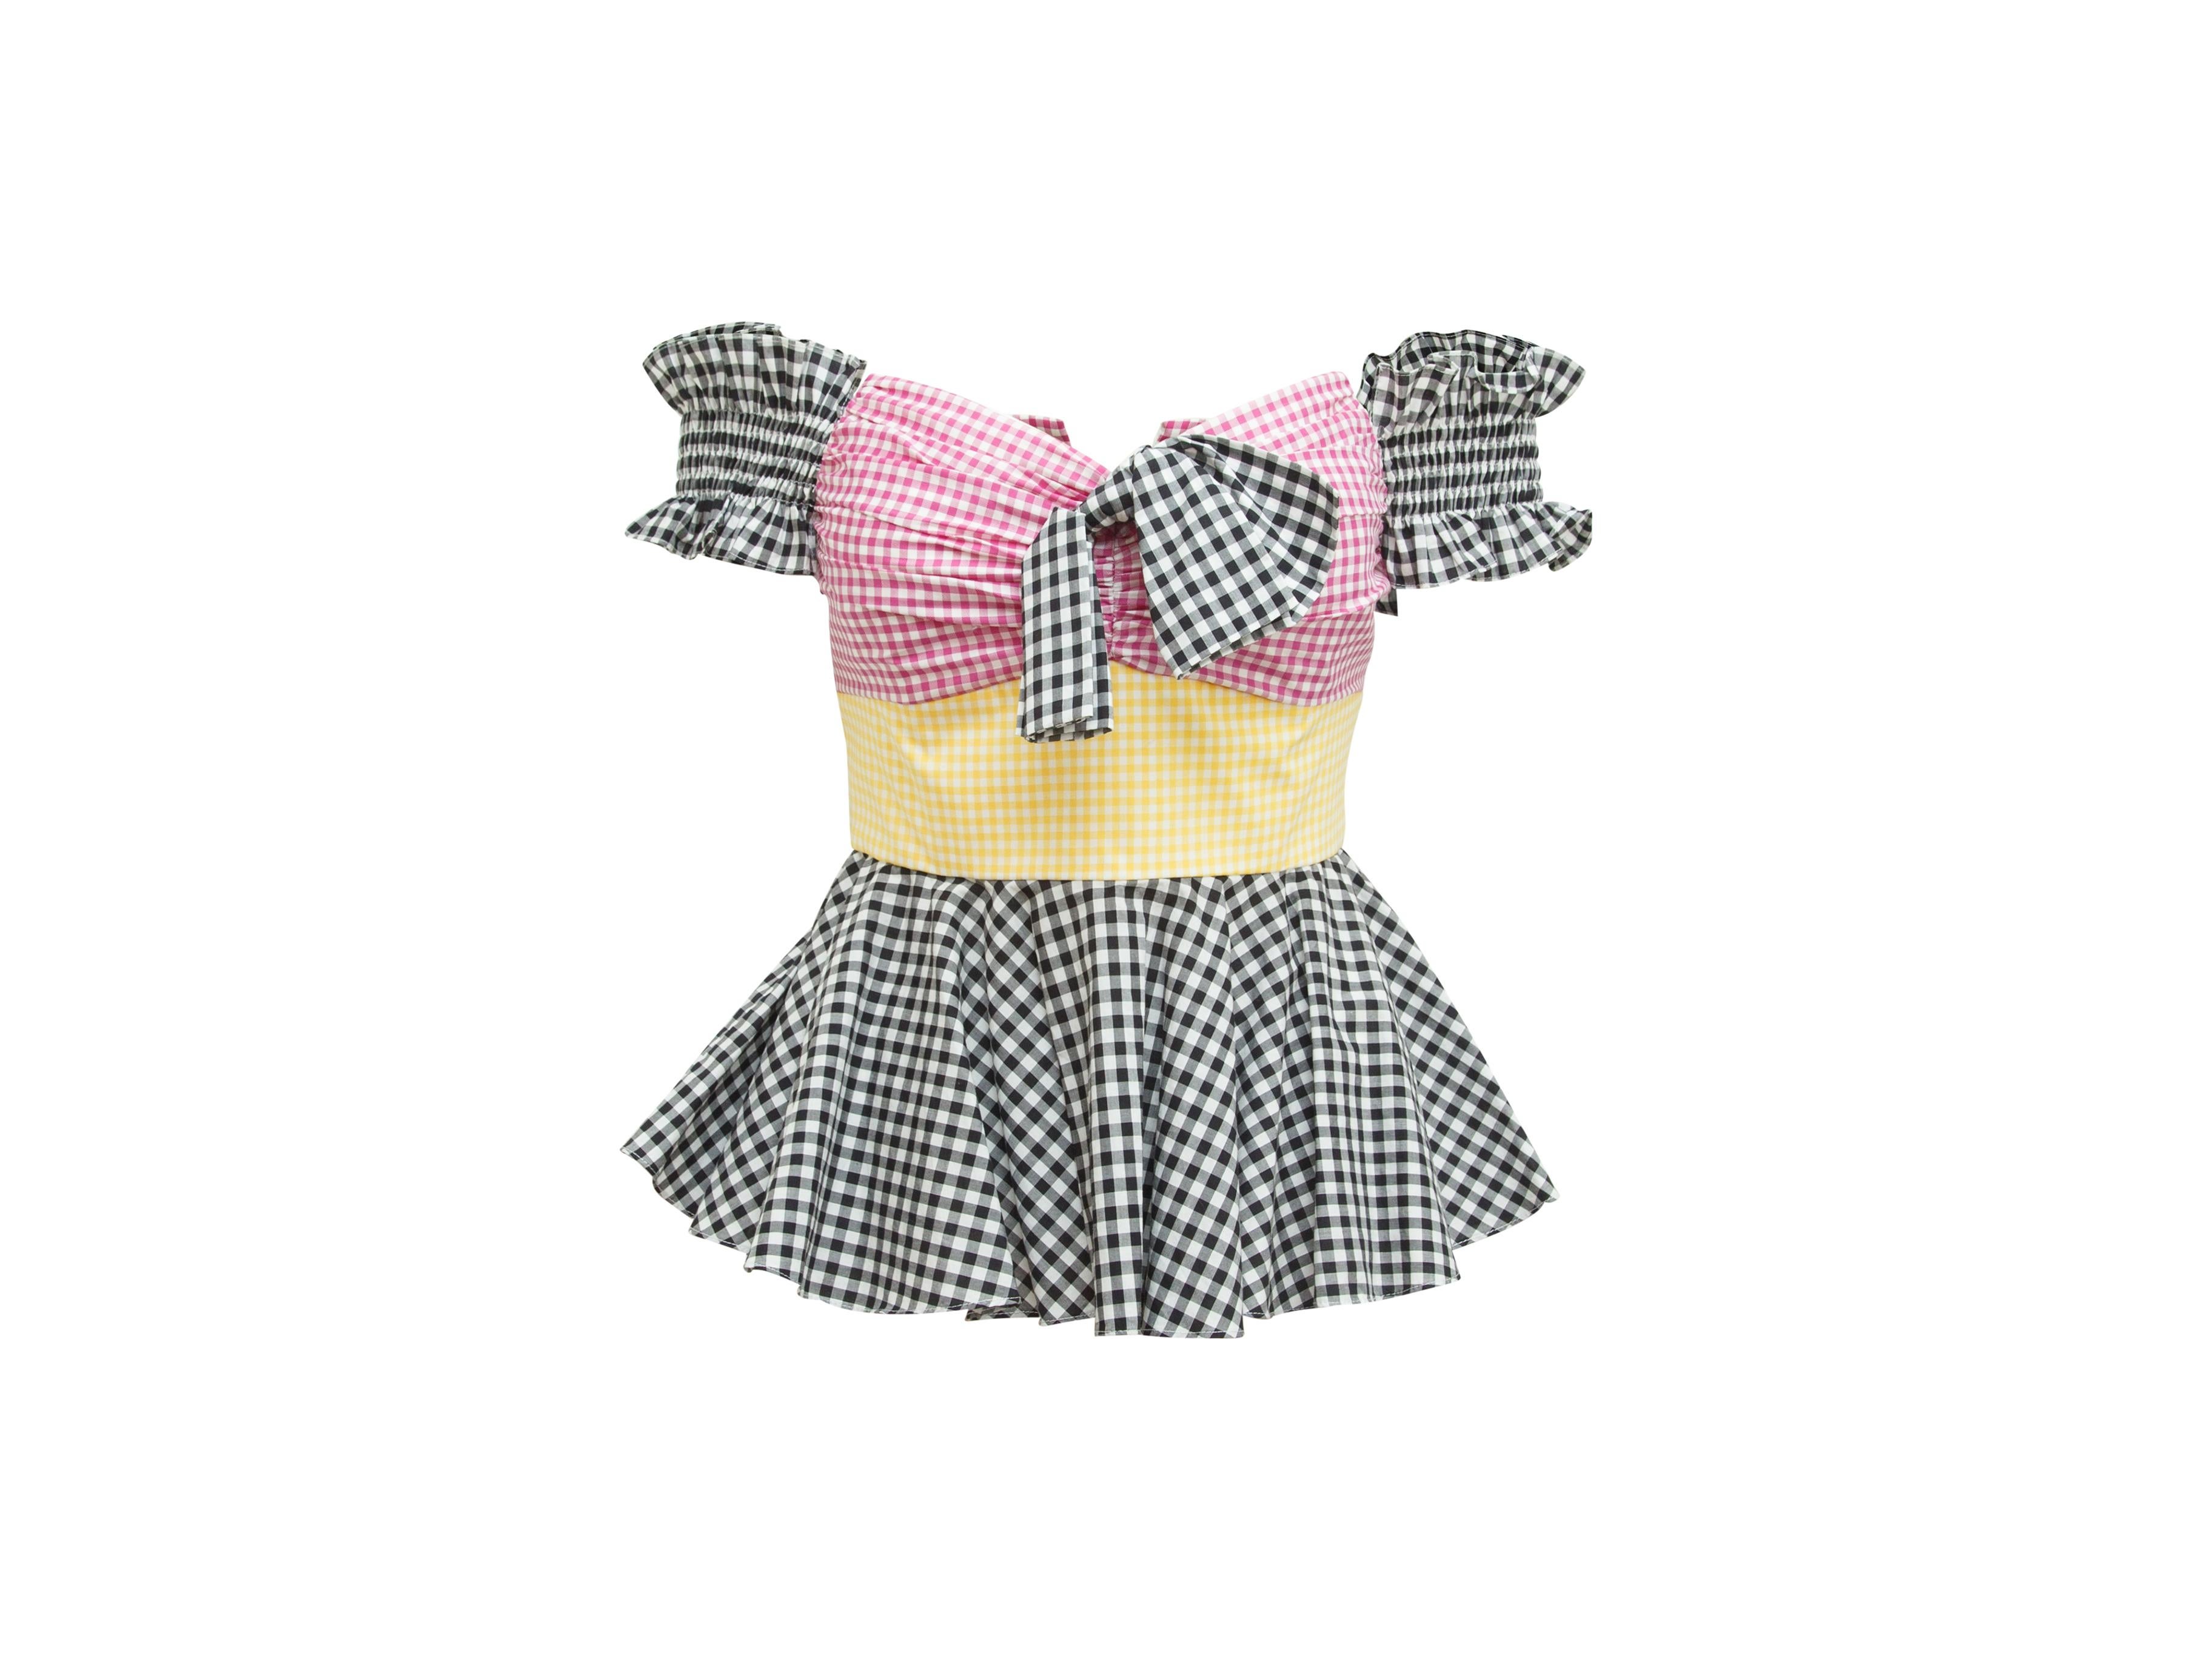 Product details:  Multicolor gingham blouse by Caroline Constas.  Sleeveless.  Straps can be worn up or off the shoulder.  Bow accents bust.  Concealed back-zip closure.  28